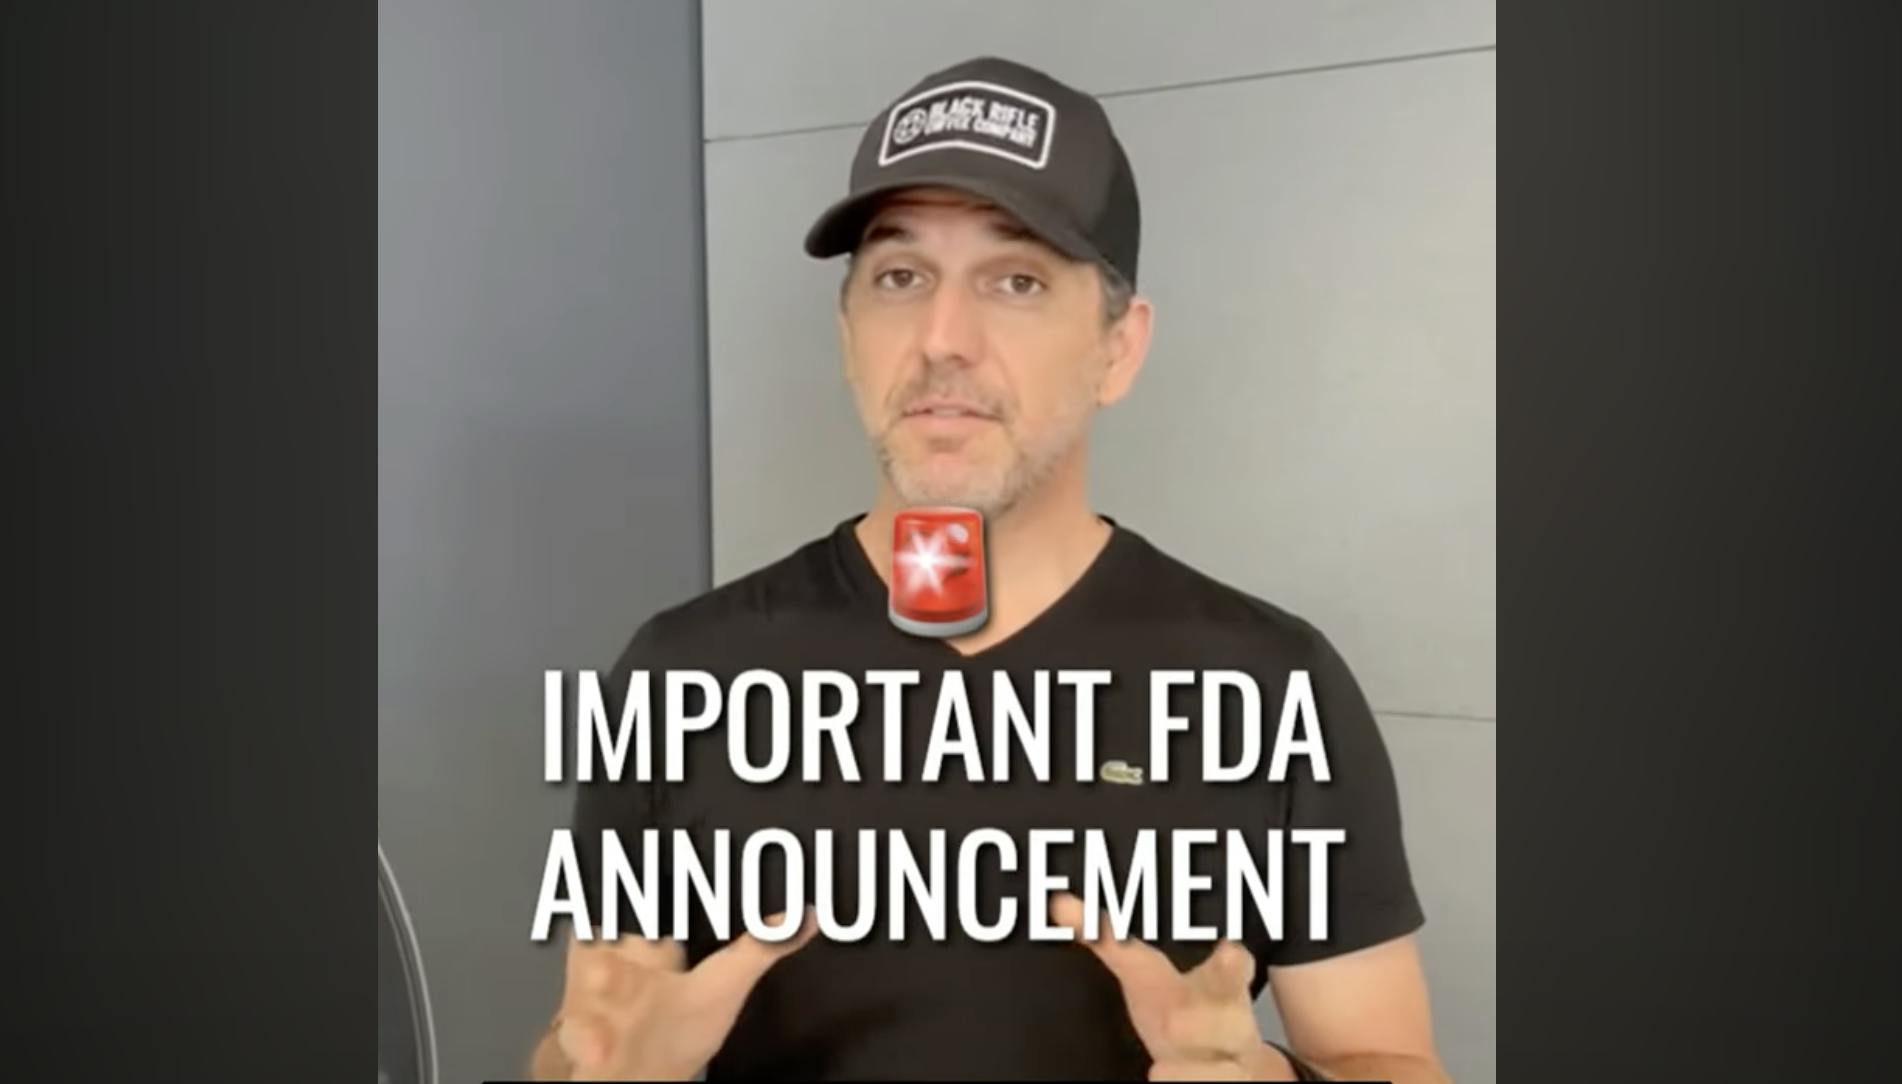 FDA Announcement With Dr. Brenner Regarding Breast Implants